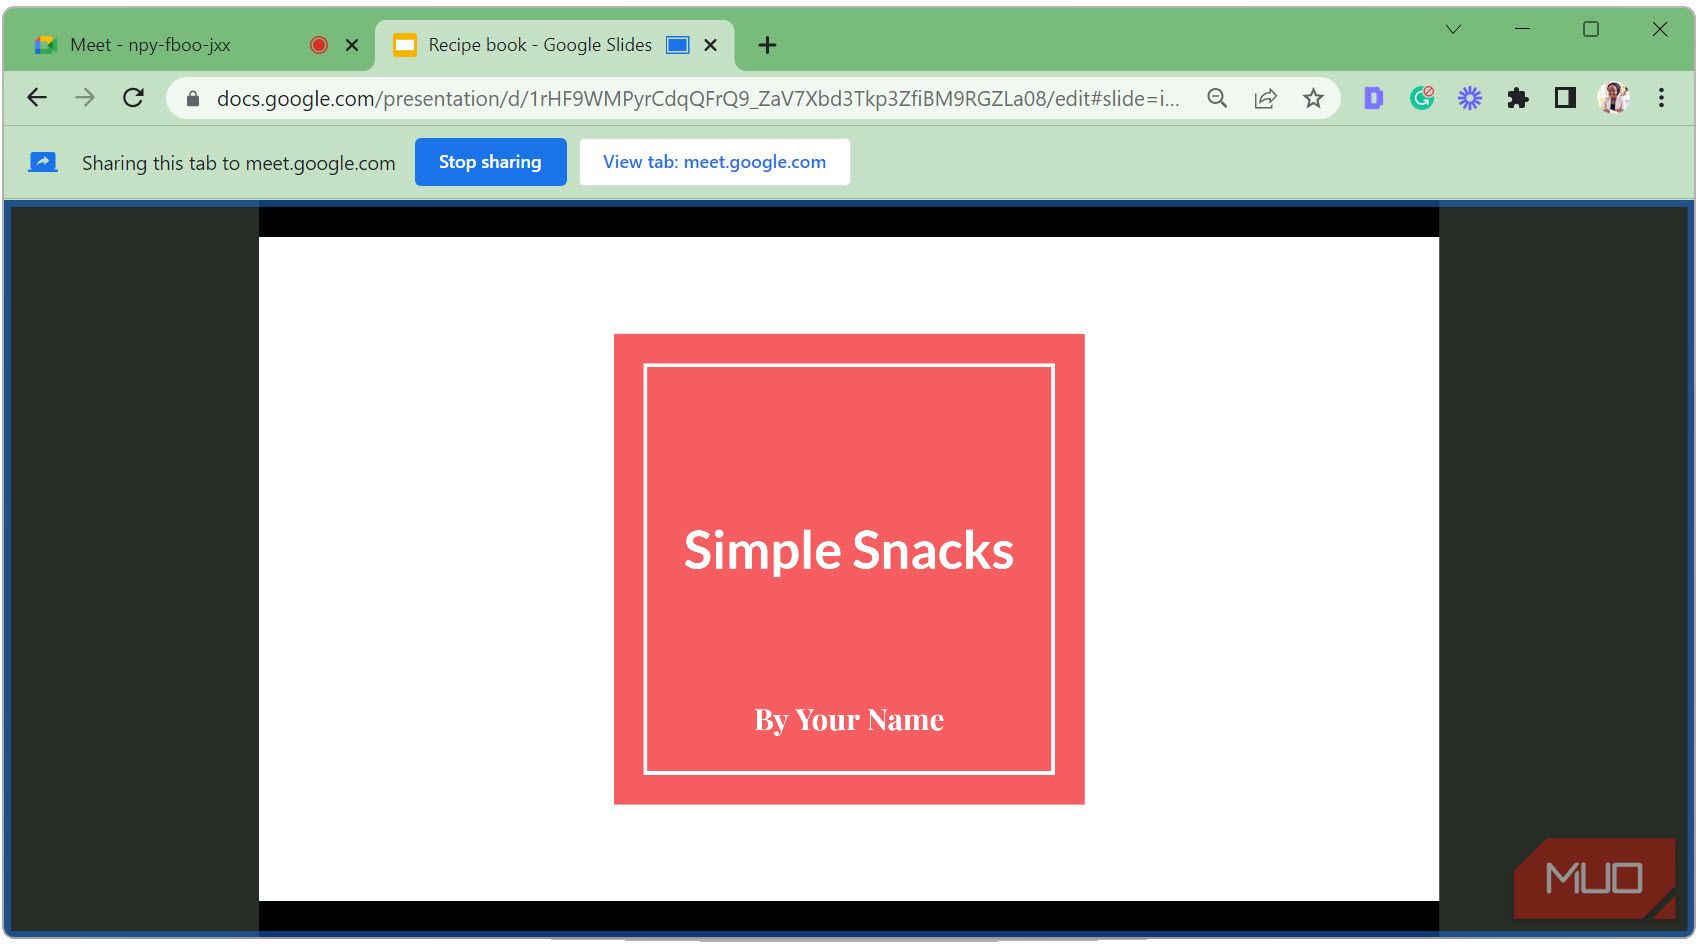 Launch Google Slides slideshow in tab view